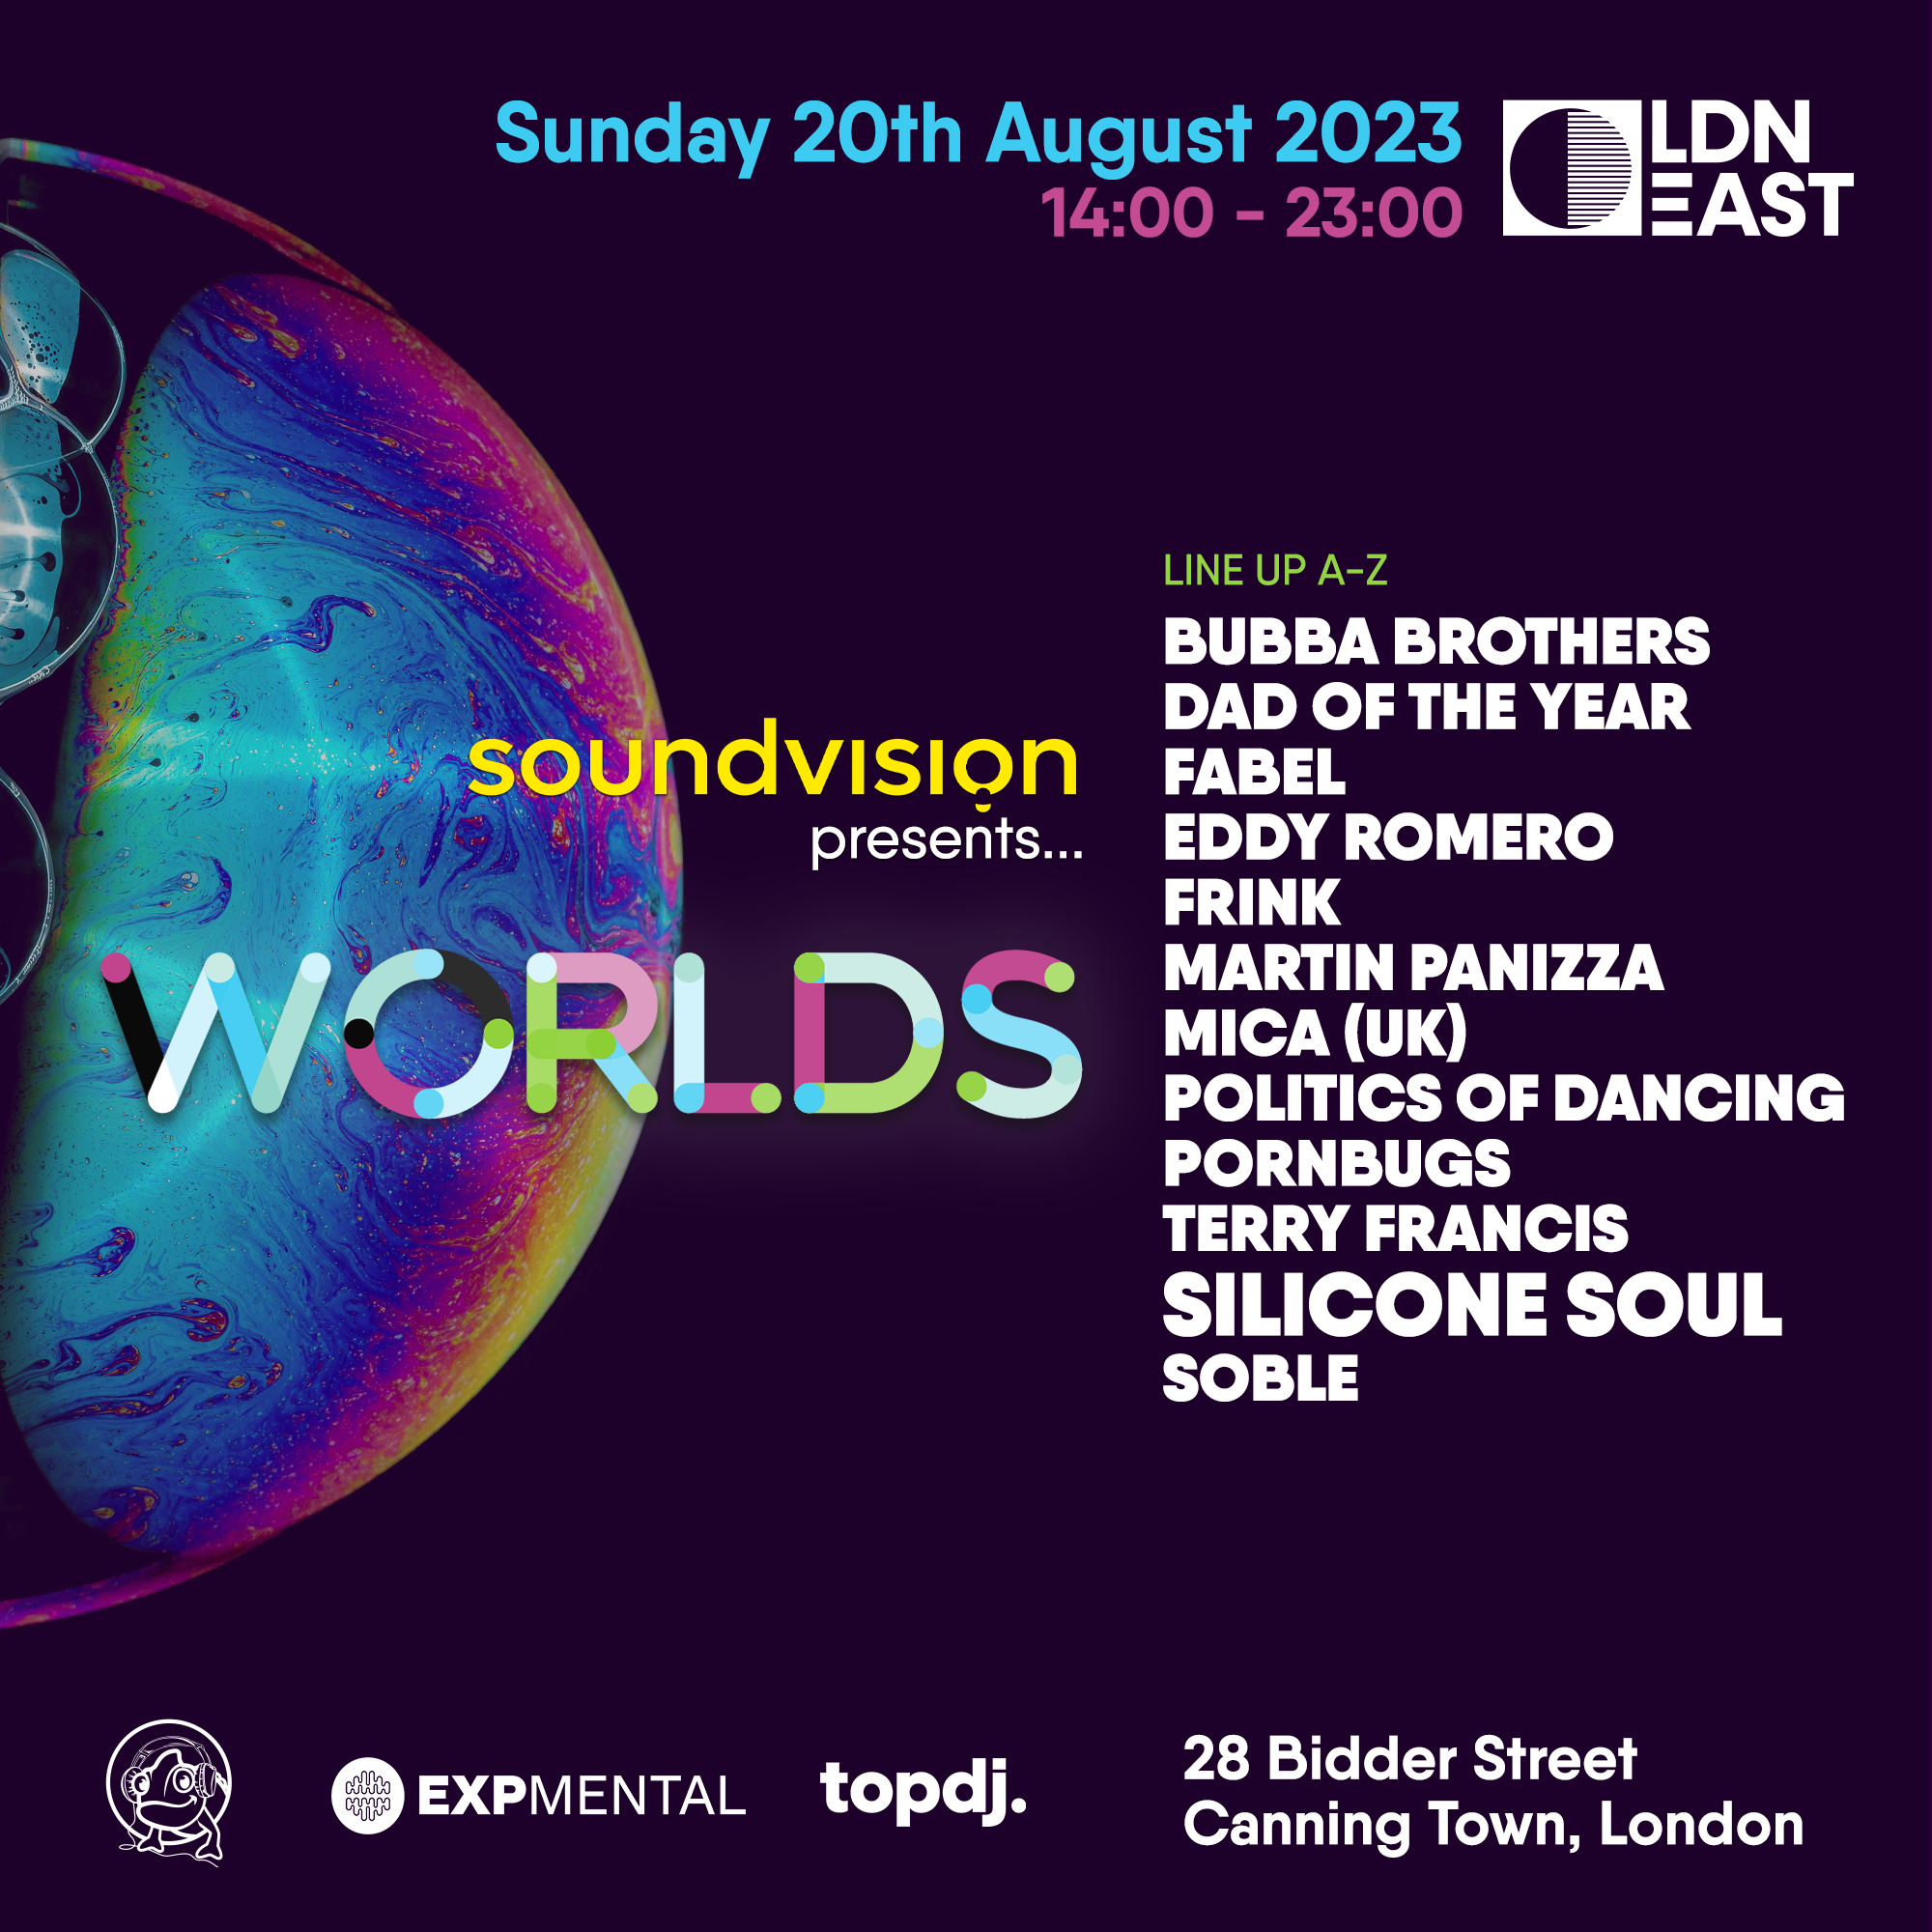 Get Ready to Dance: Bubba Brothers Joins Soundvision Presents: WORLDS at LDN EAST